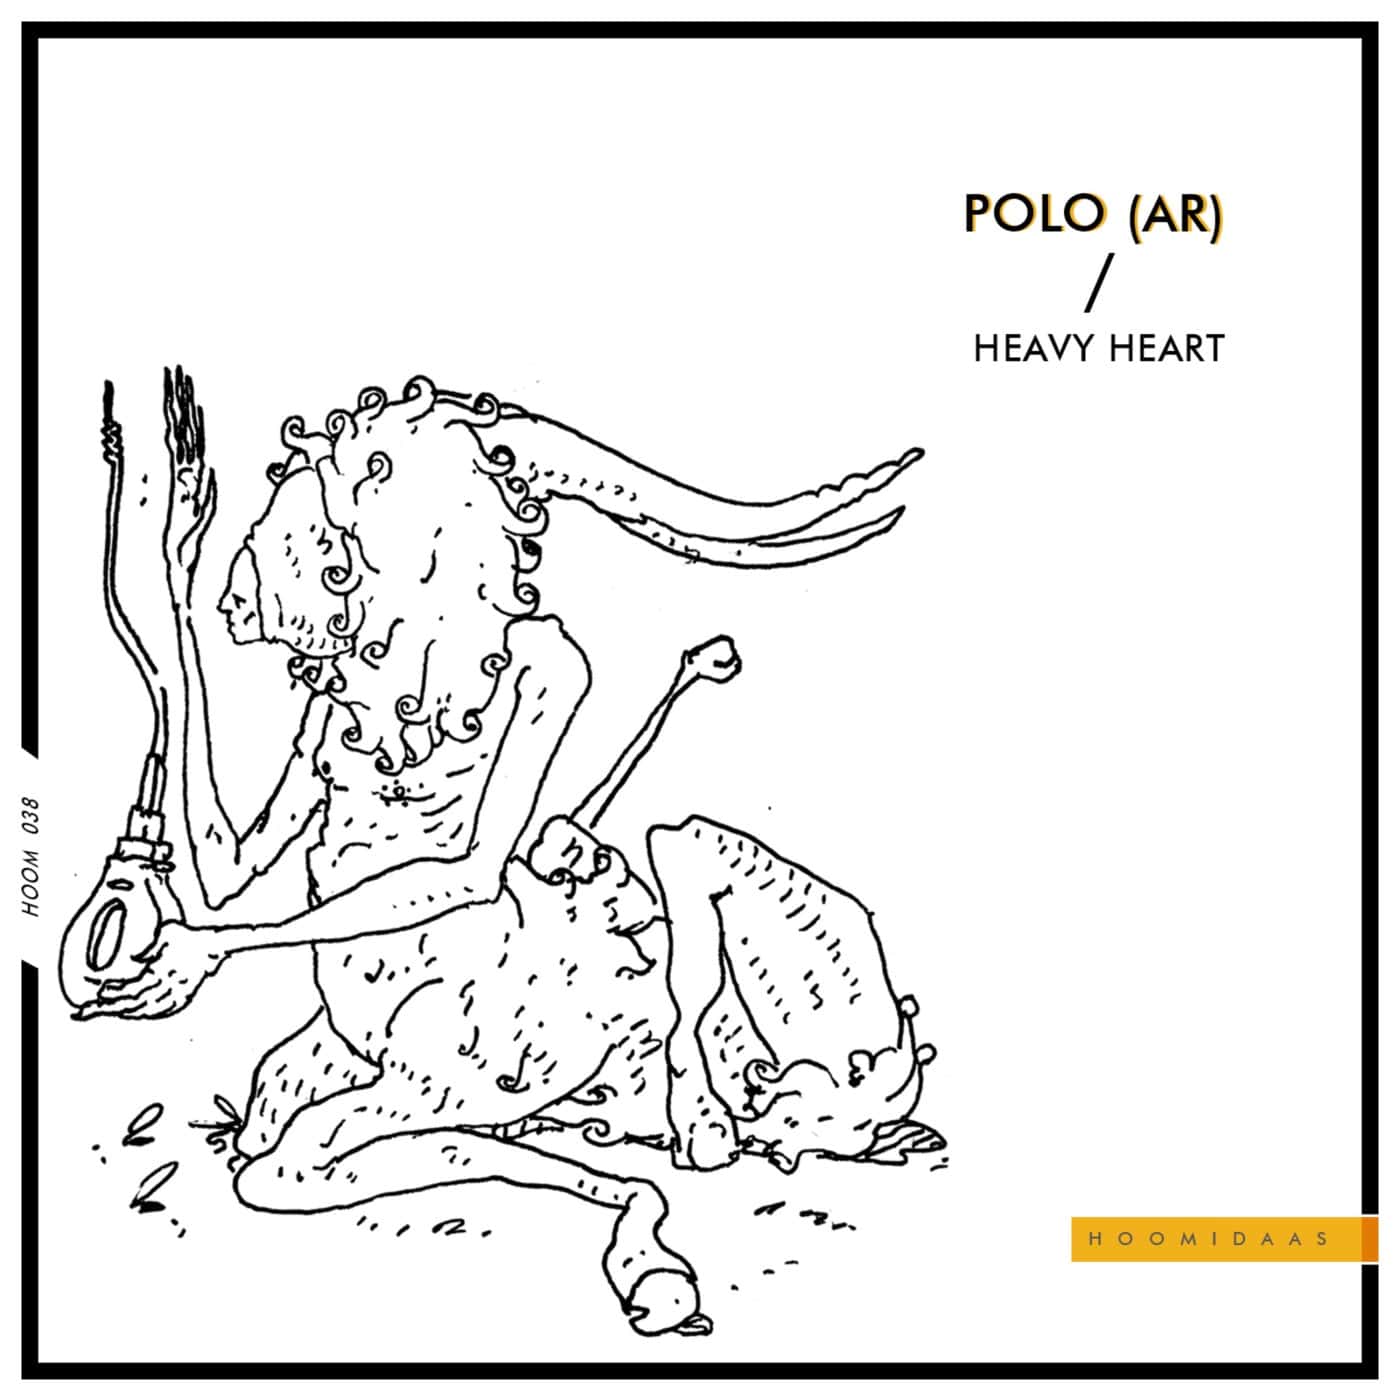 Download Polo (AR) - Heavy Heart on Electrobuzz